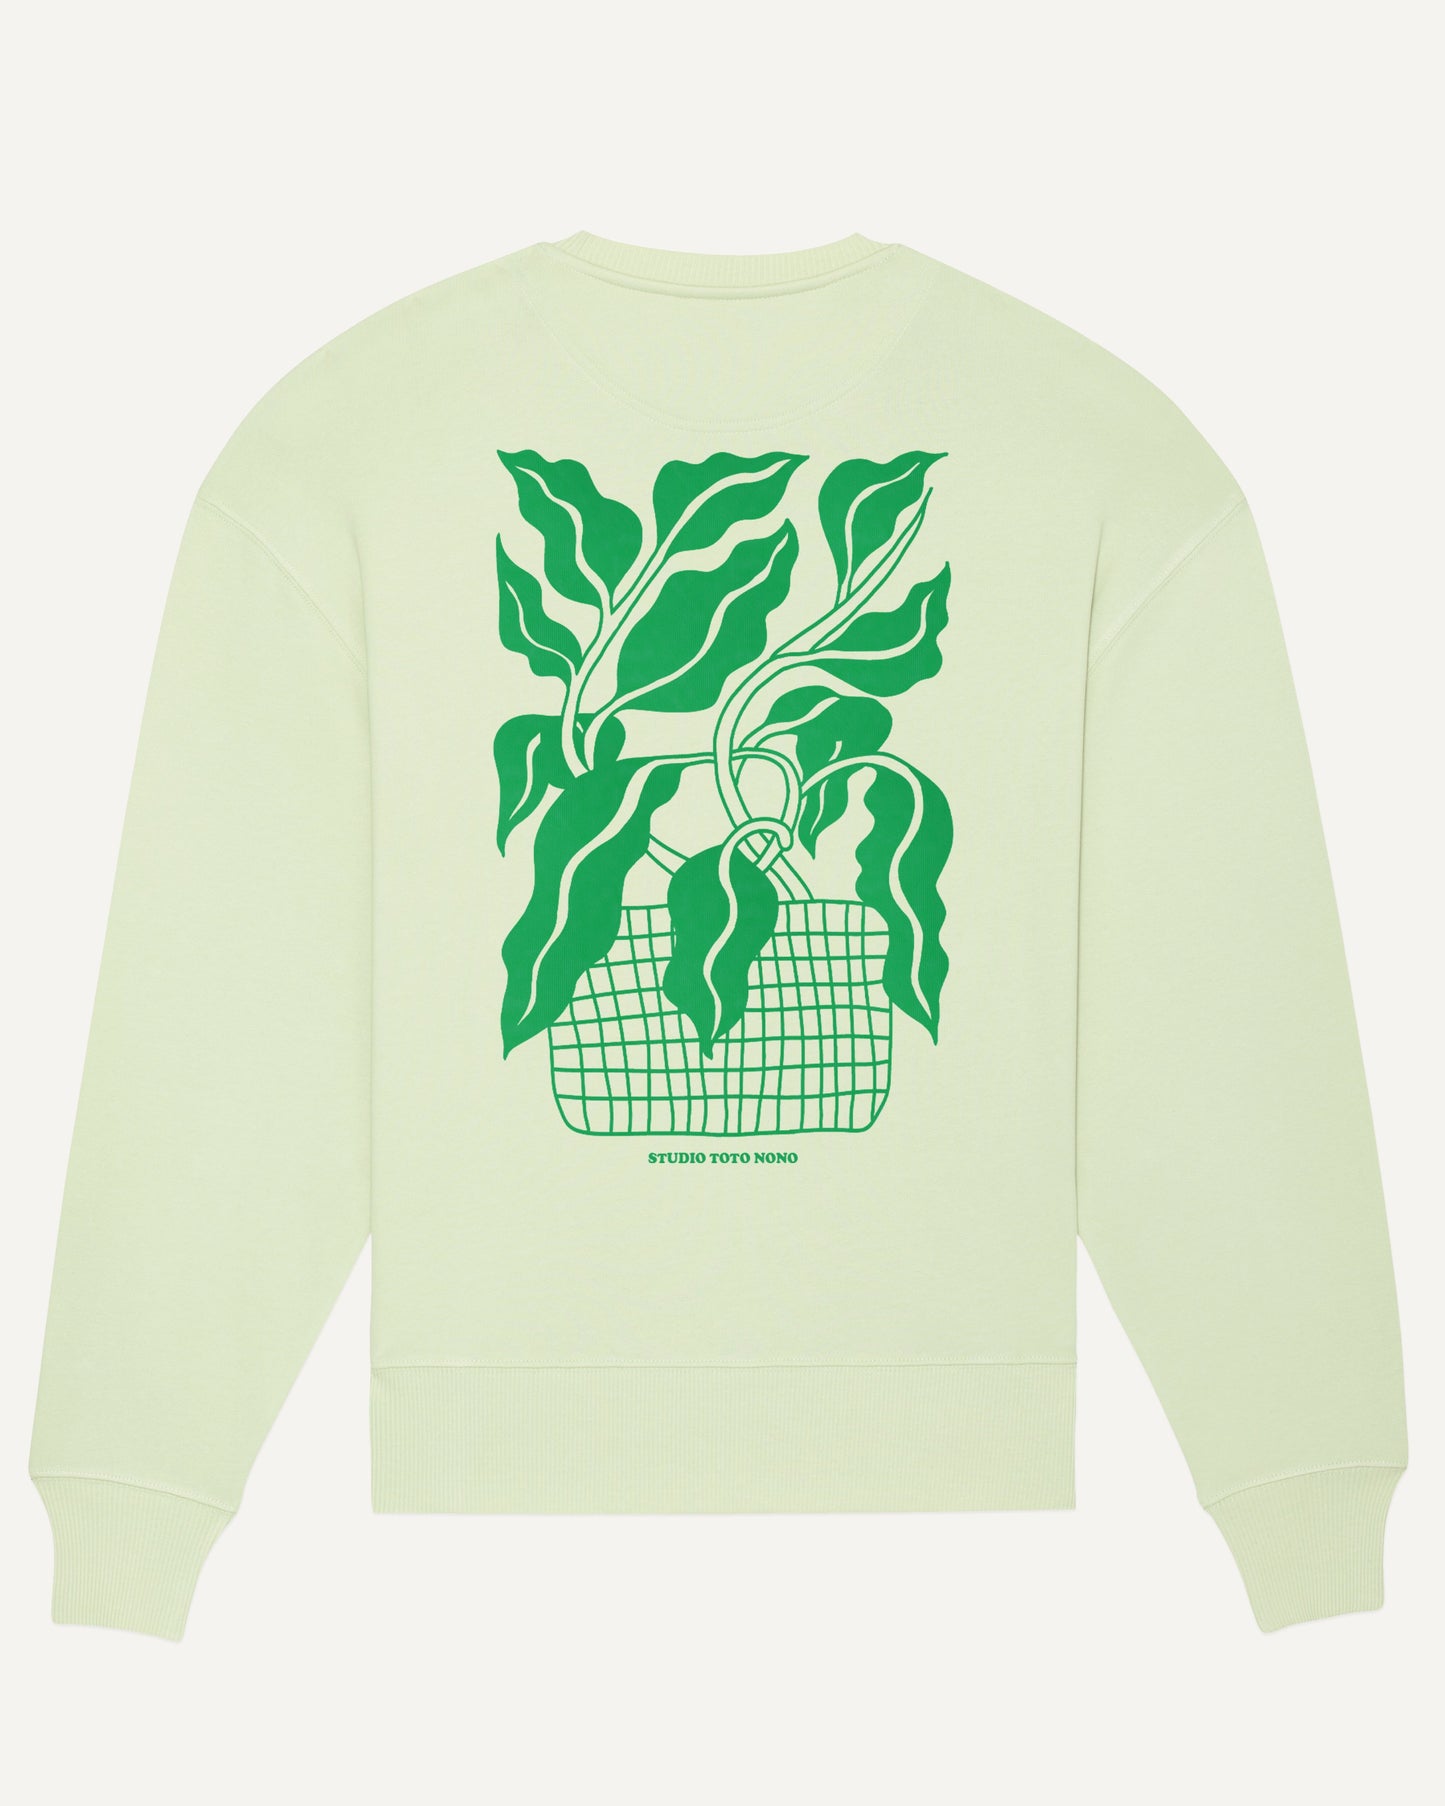 »GROW YOUR OWN WAY« Unisex Sweater